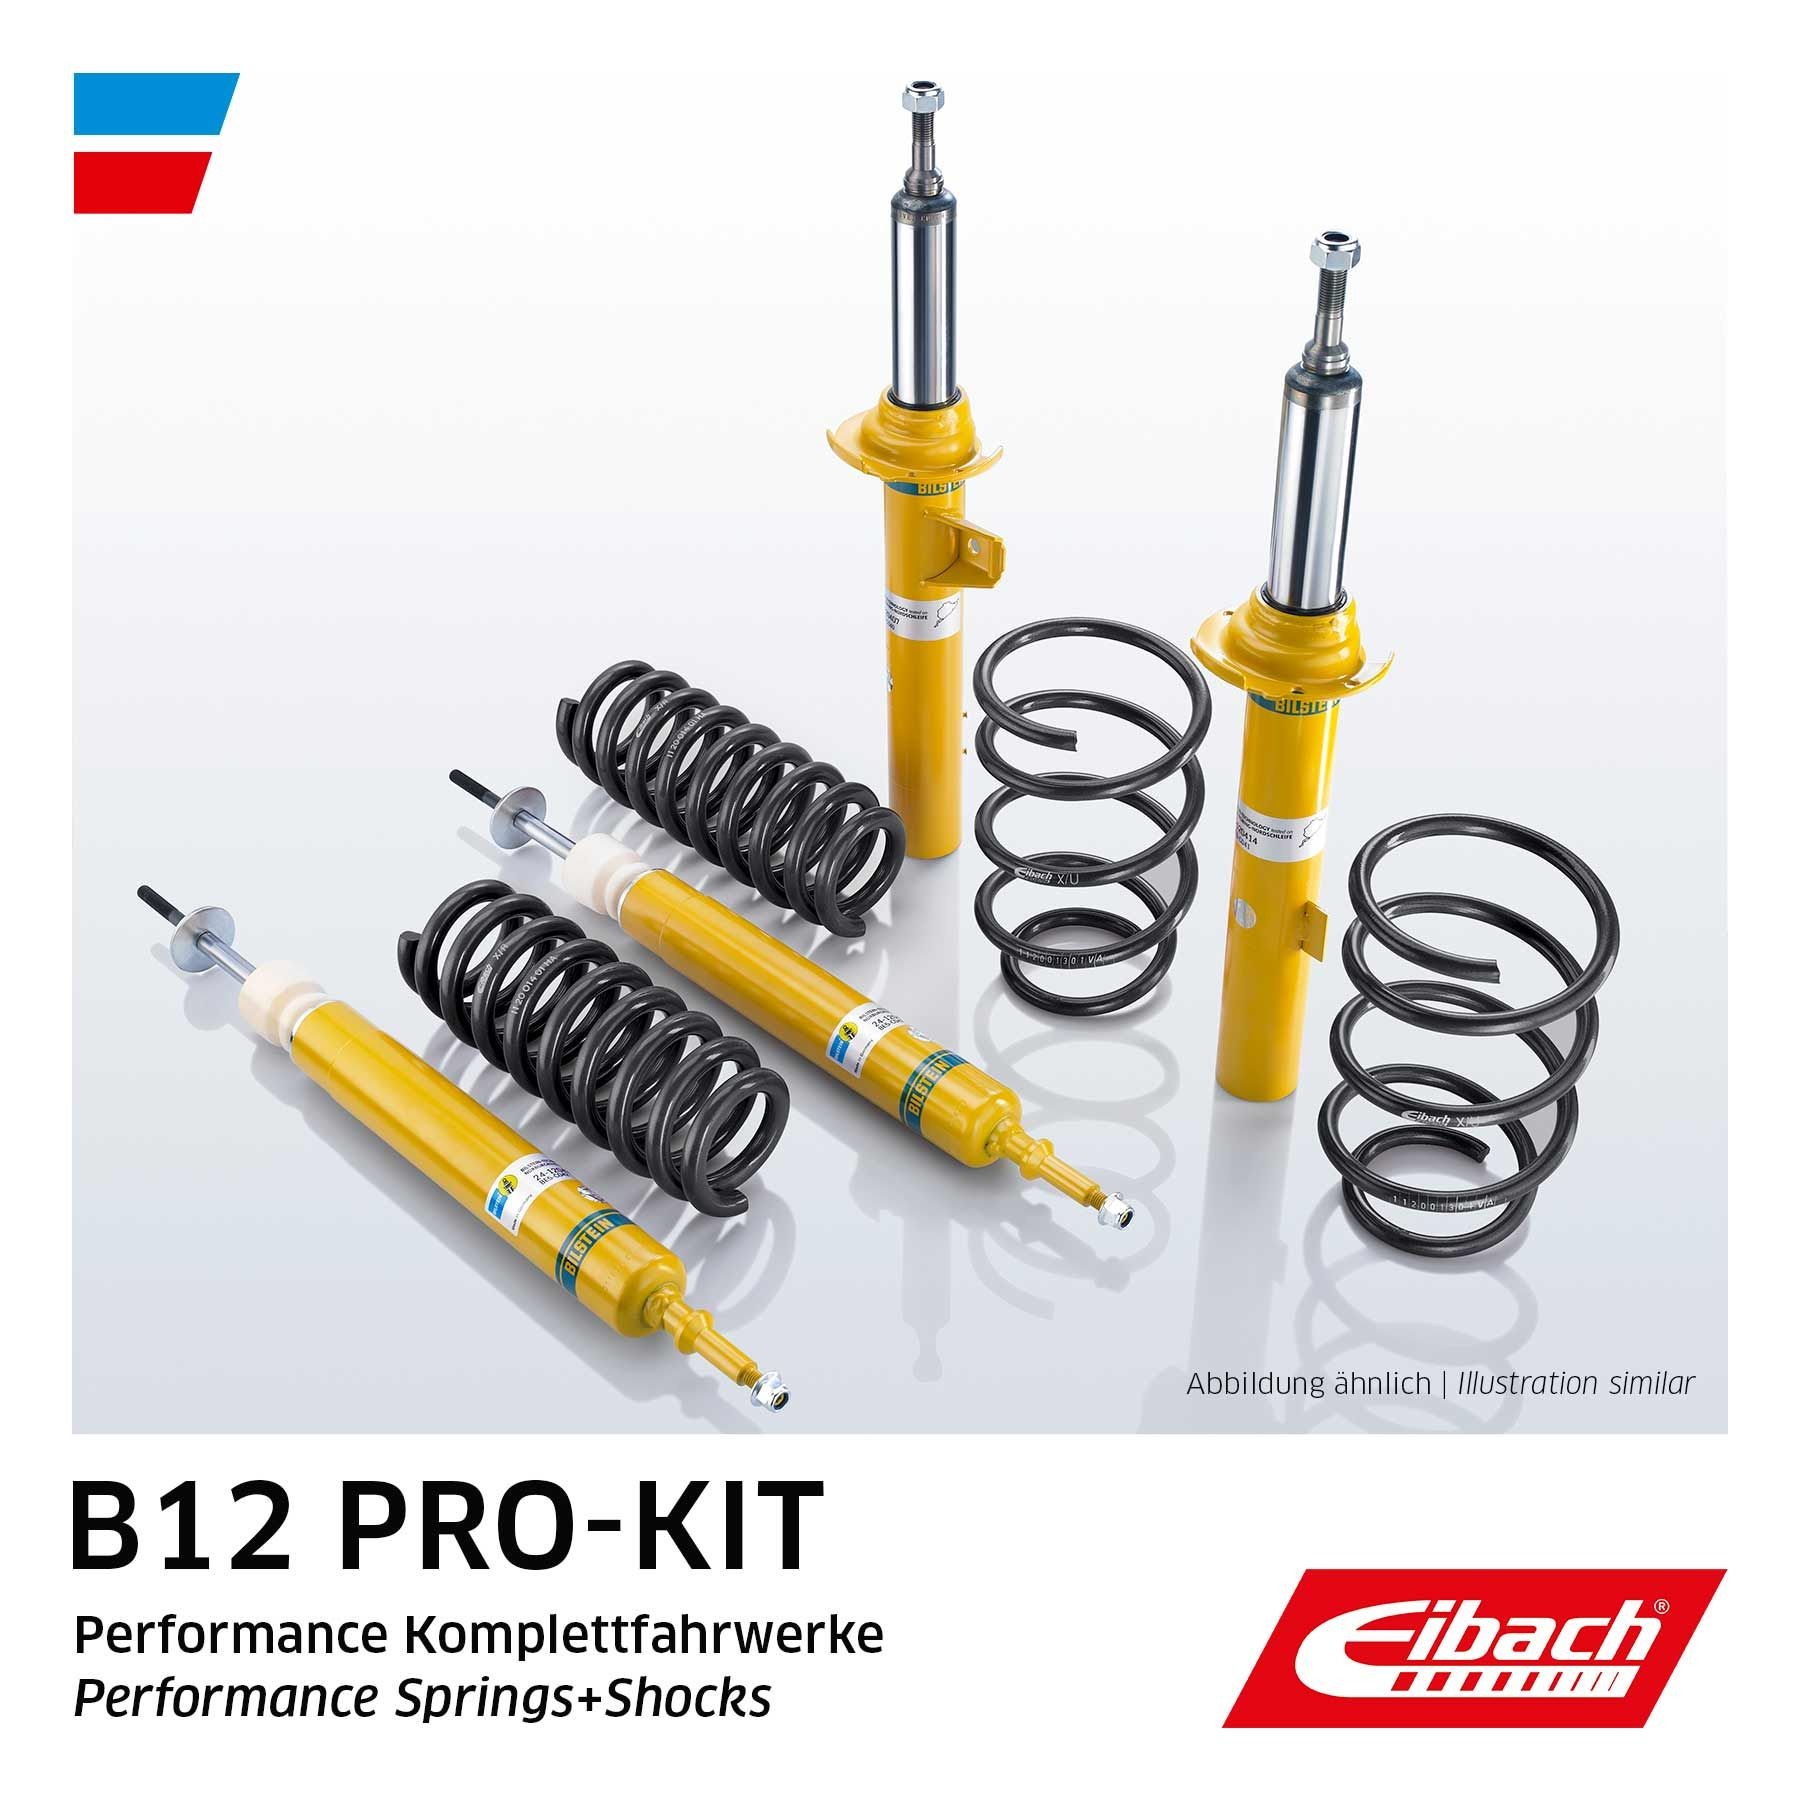 EIBACH E90-70-002-05-20 PEUGEOT Suspension kit, coil springs / shock absorbers in original quality